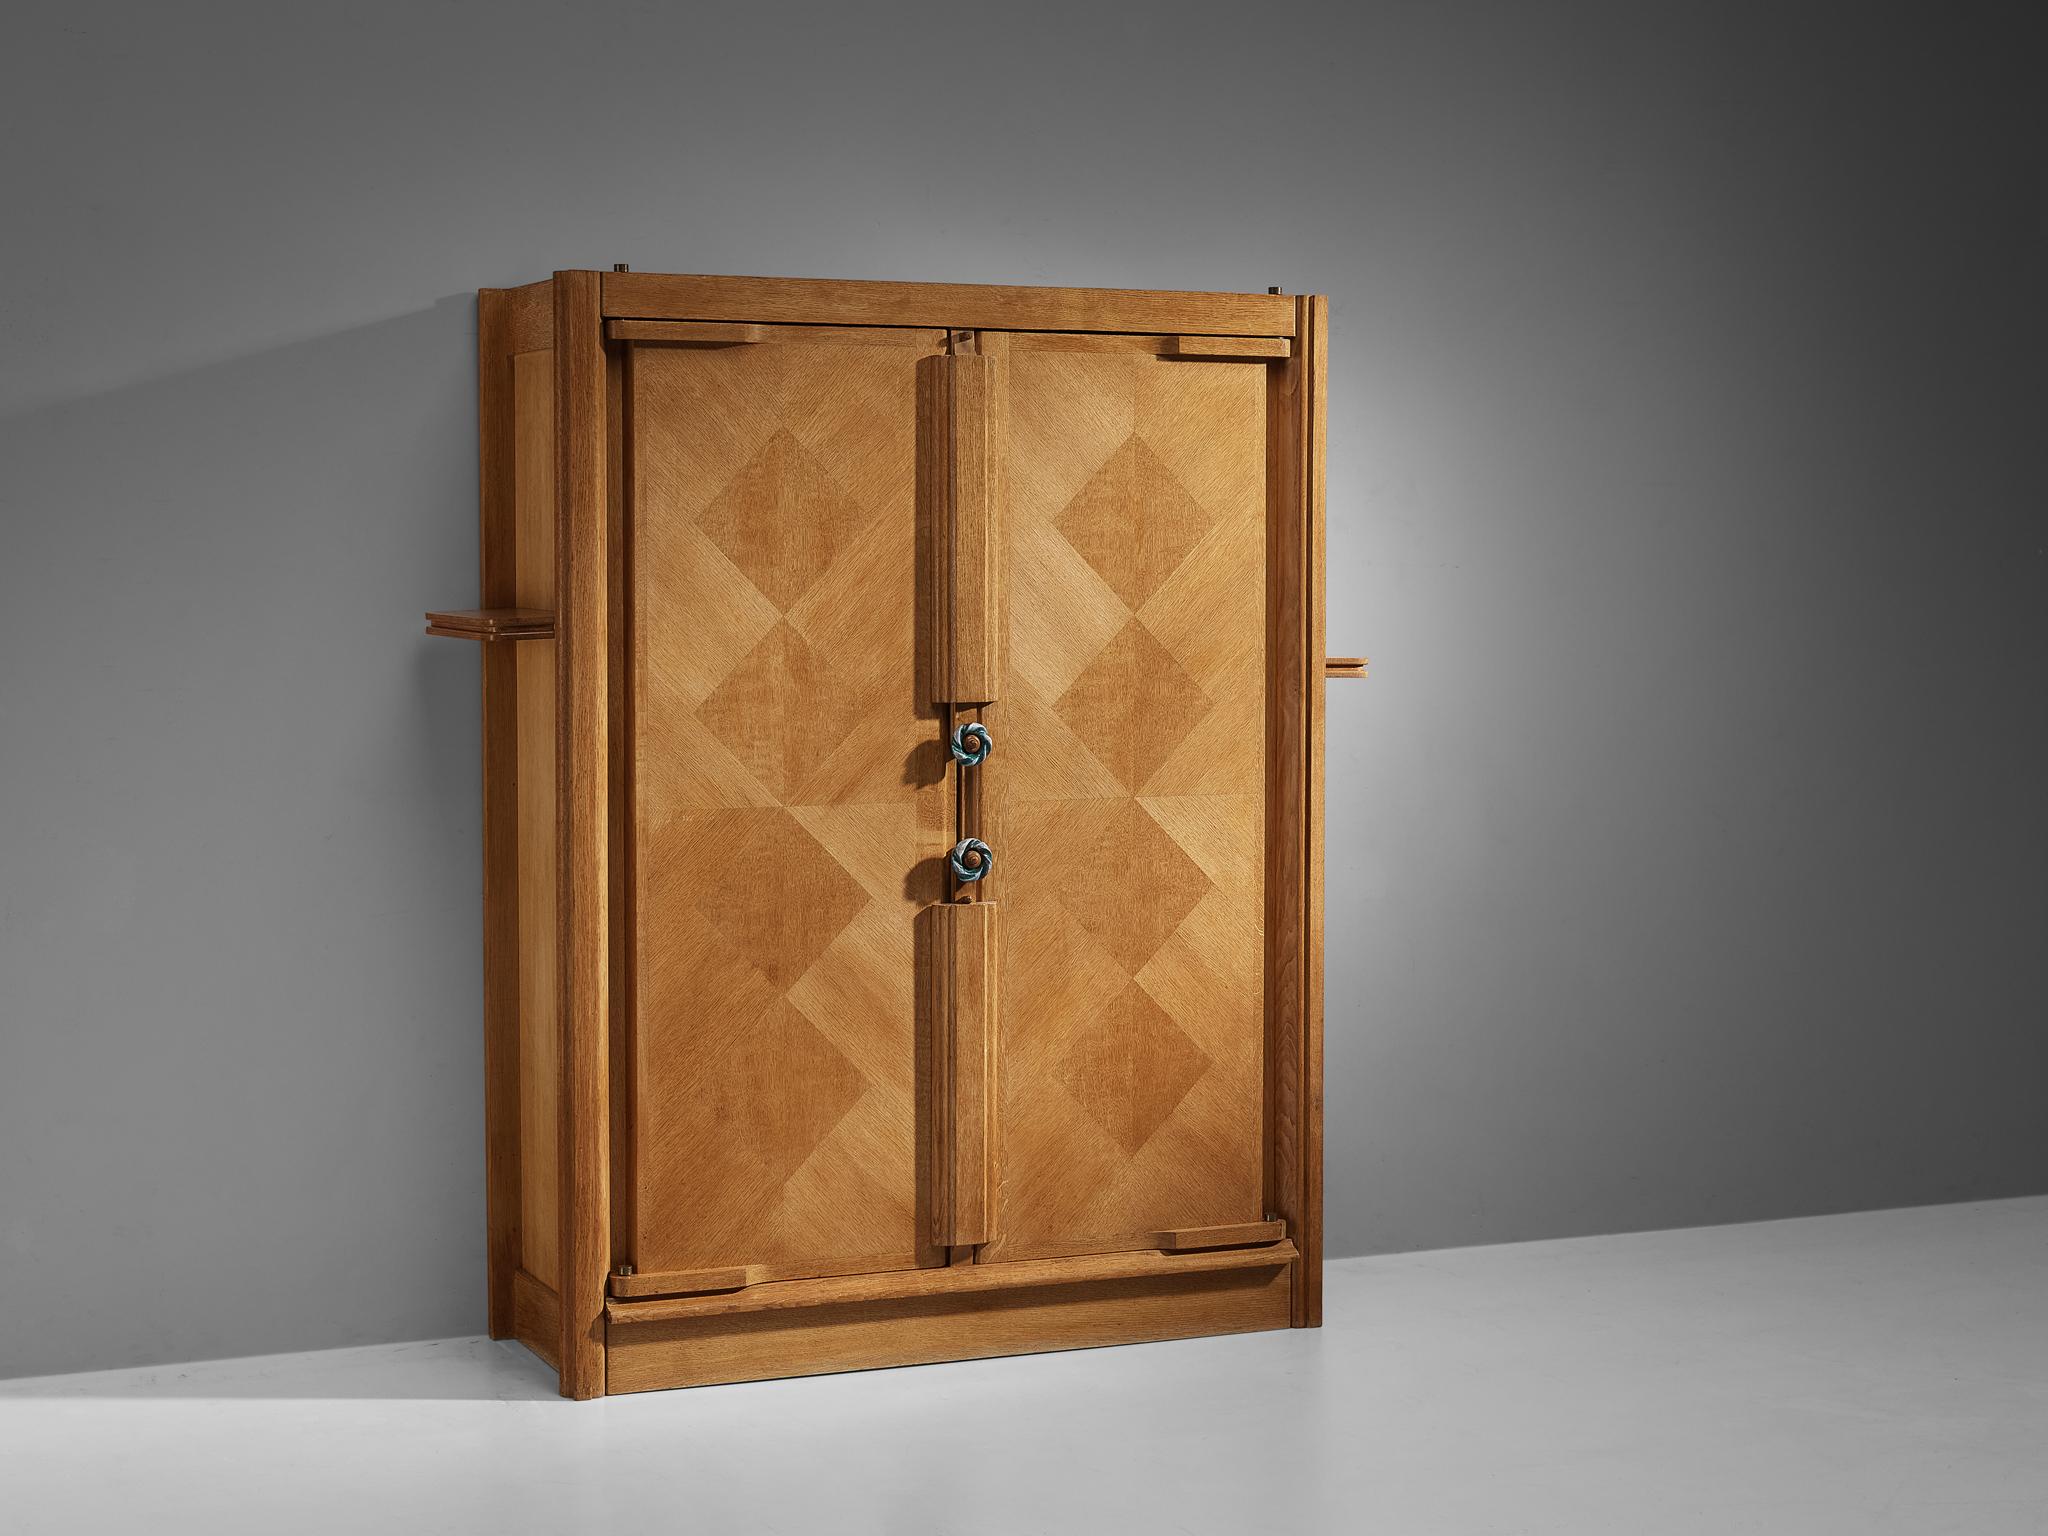 Guillerme et Chambron for Votre Maison, cabinet, oak, France, 1960s

This case piece is designed by Guillerme and Chambron and features a front with geometric oak inlays, which is characteristic for the French designer duo. The middle is accentuated